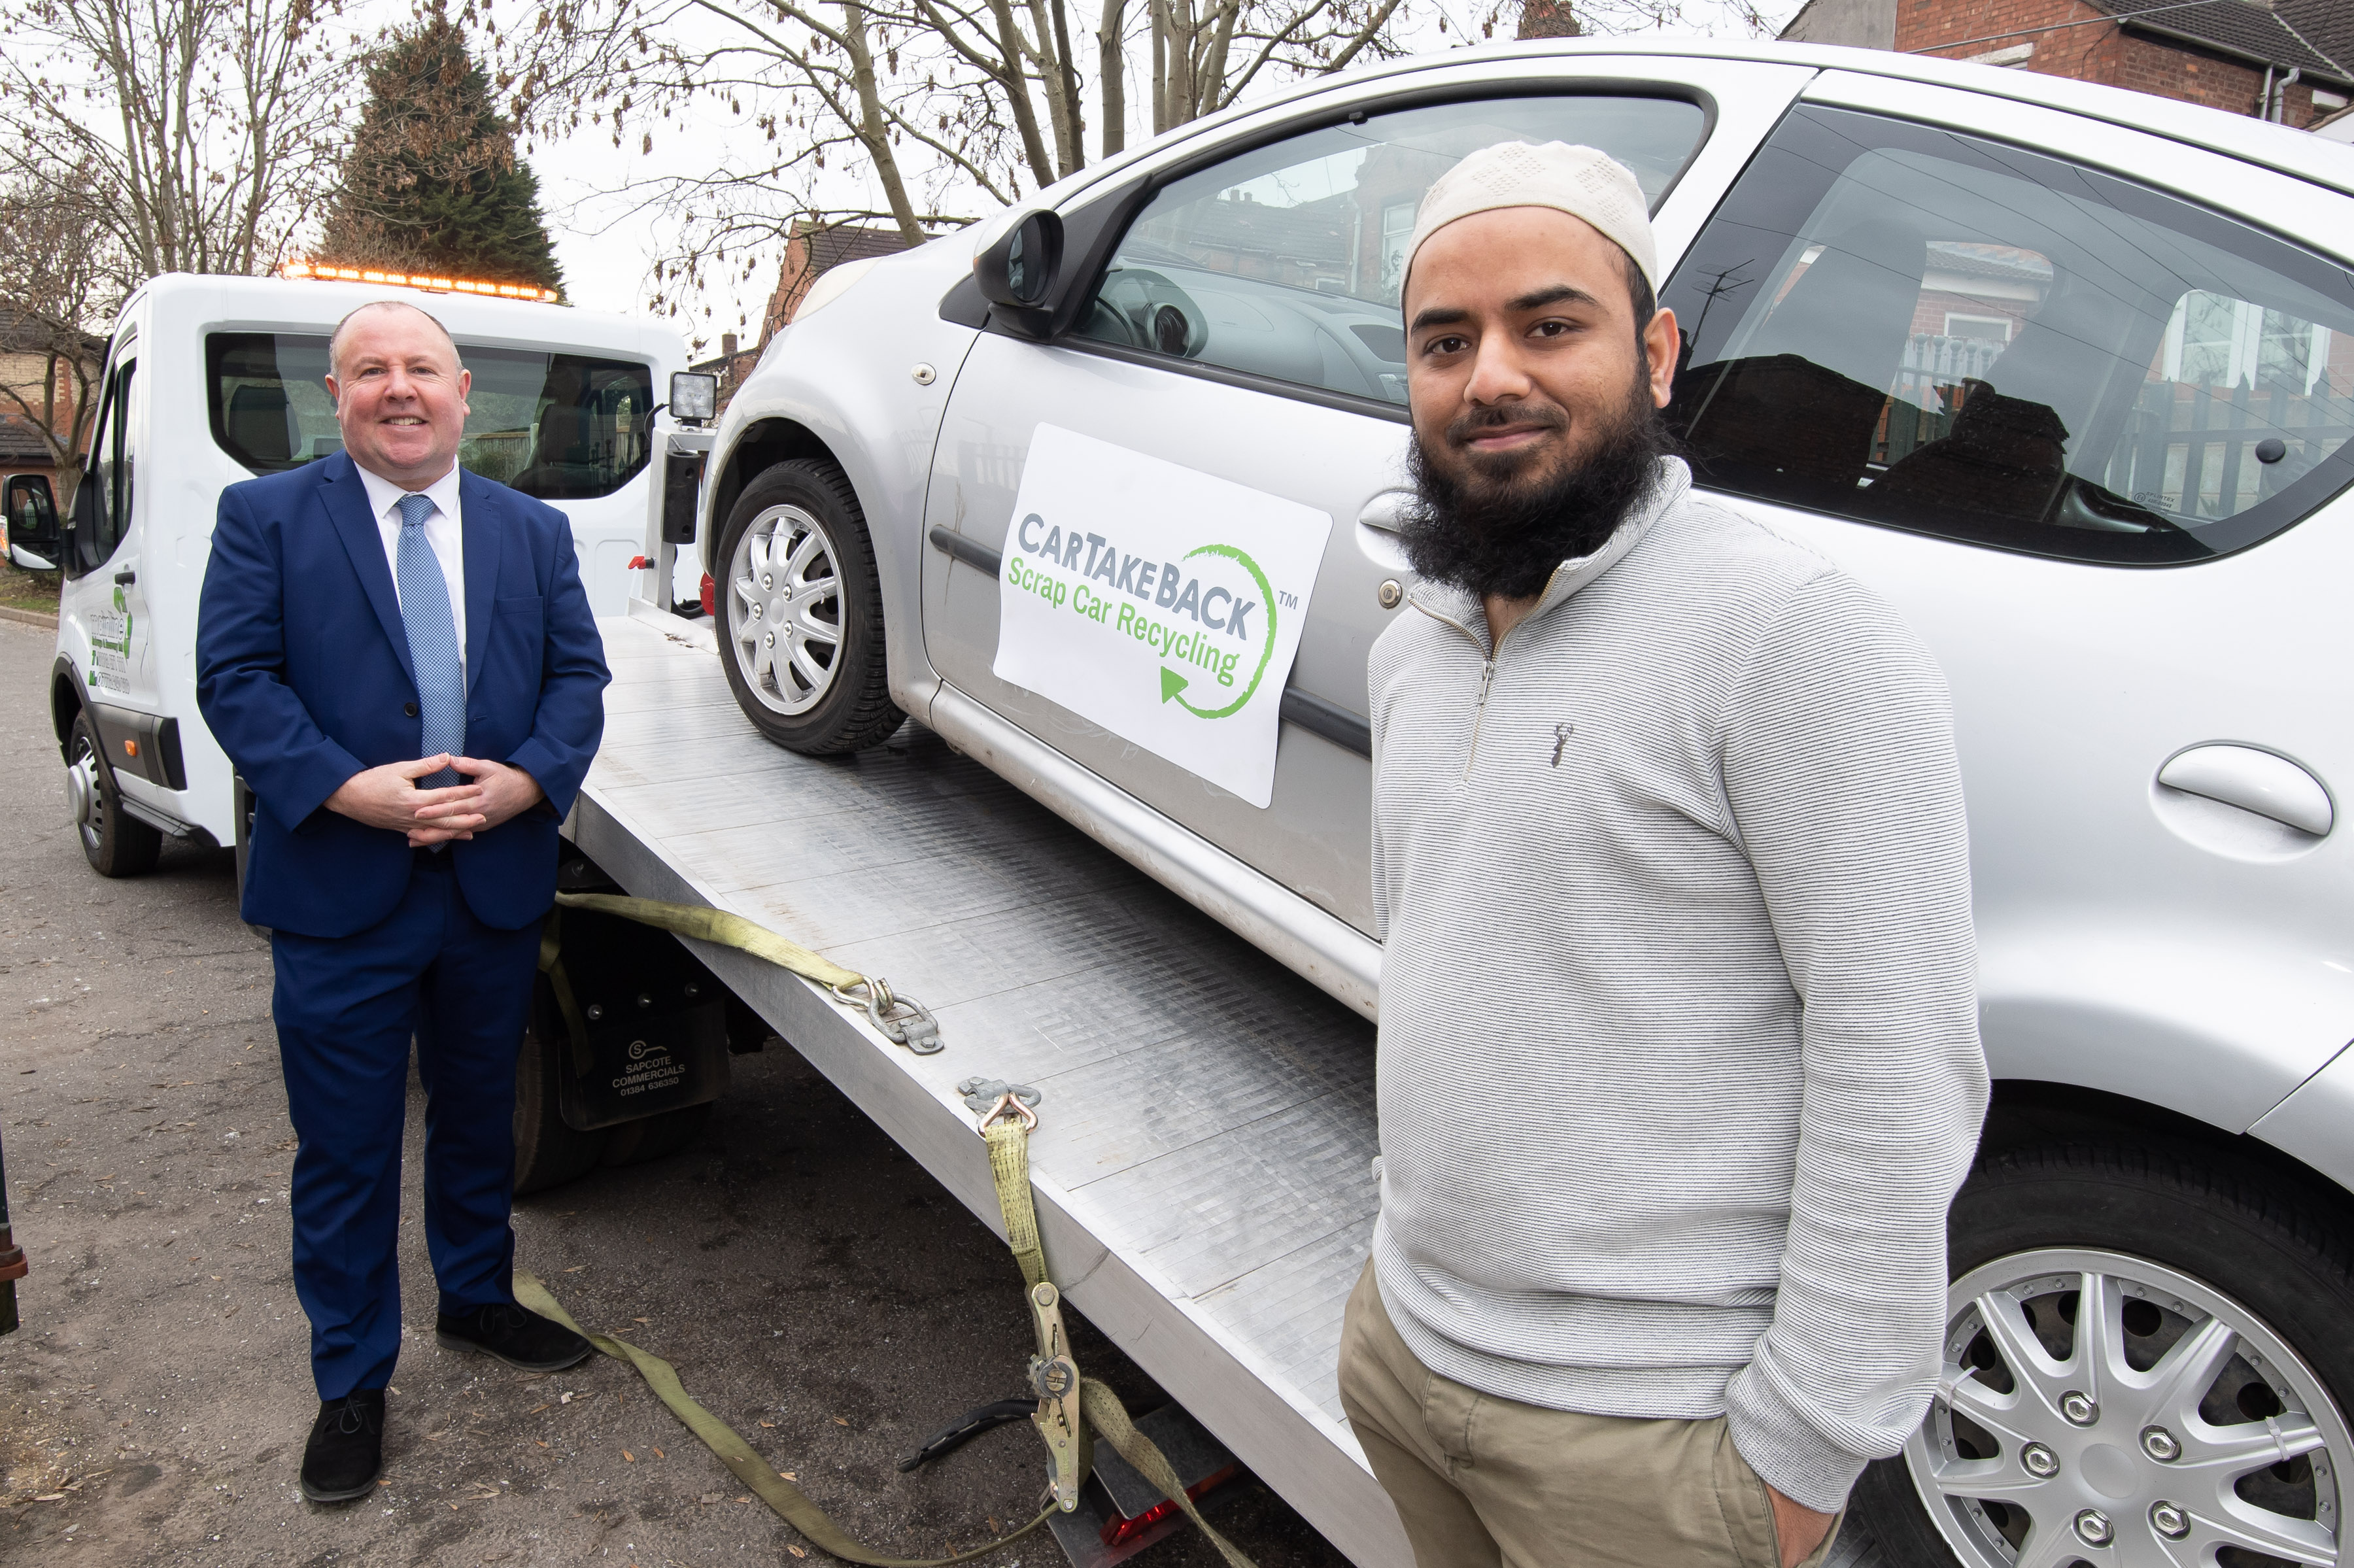 Mohammed Fasiuddin with cllr Jim O'Boyle as the car is taken away for recycling